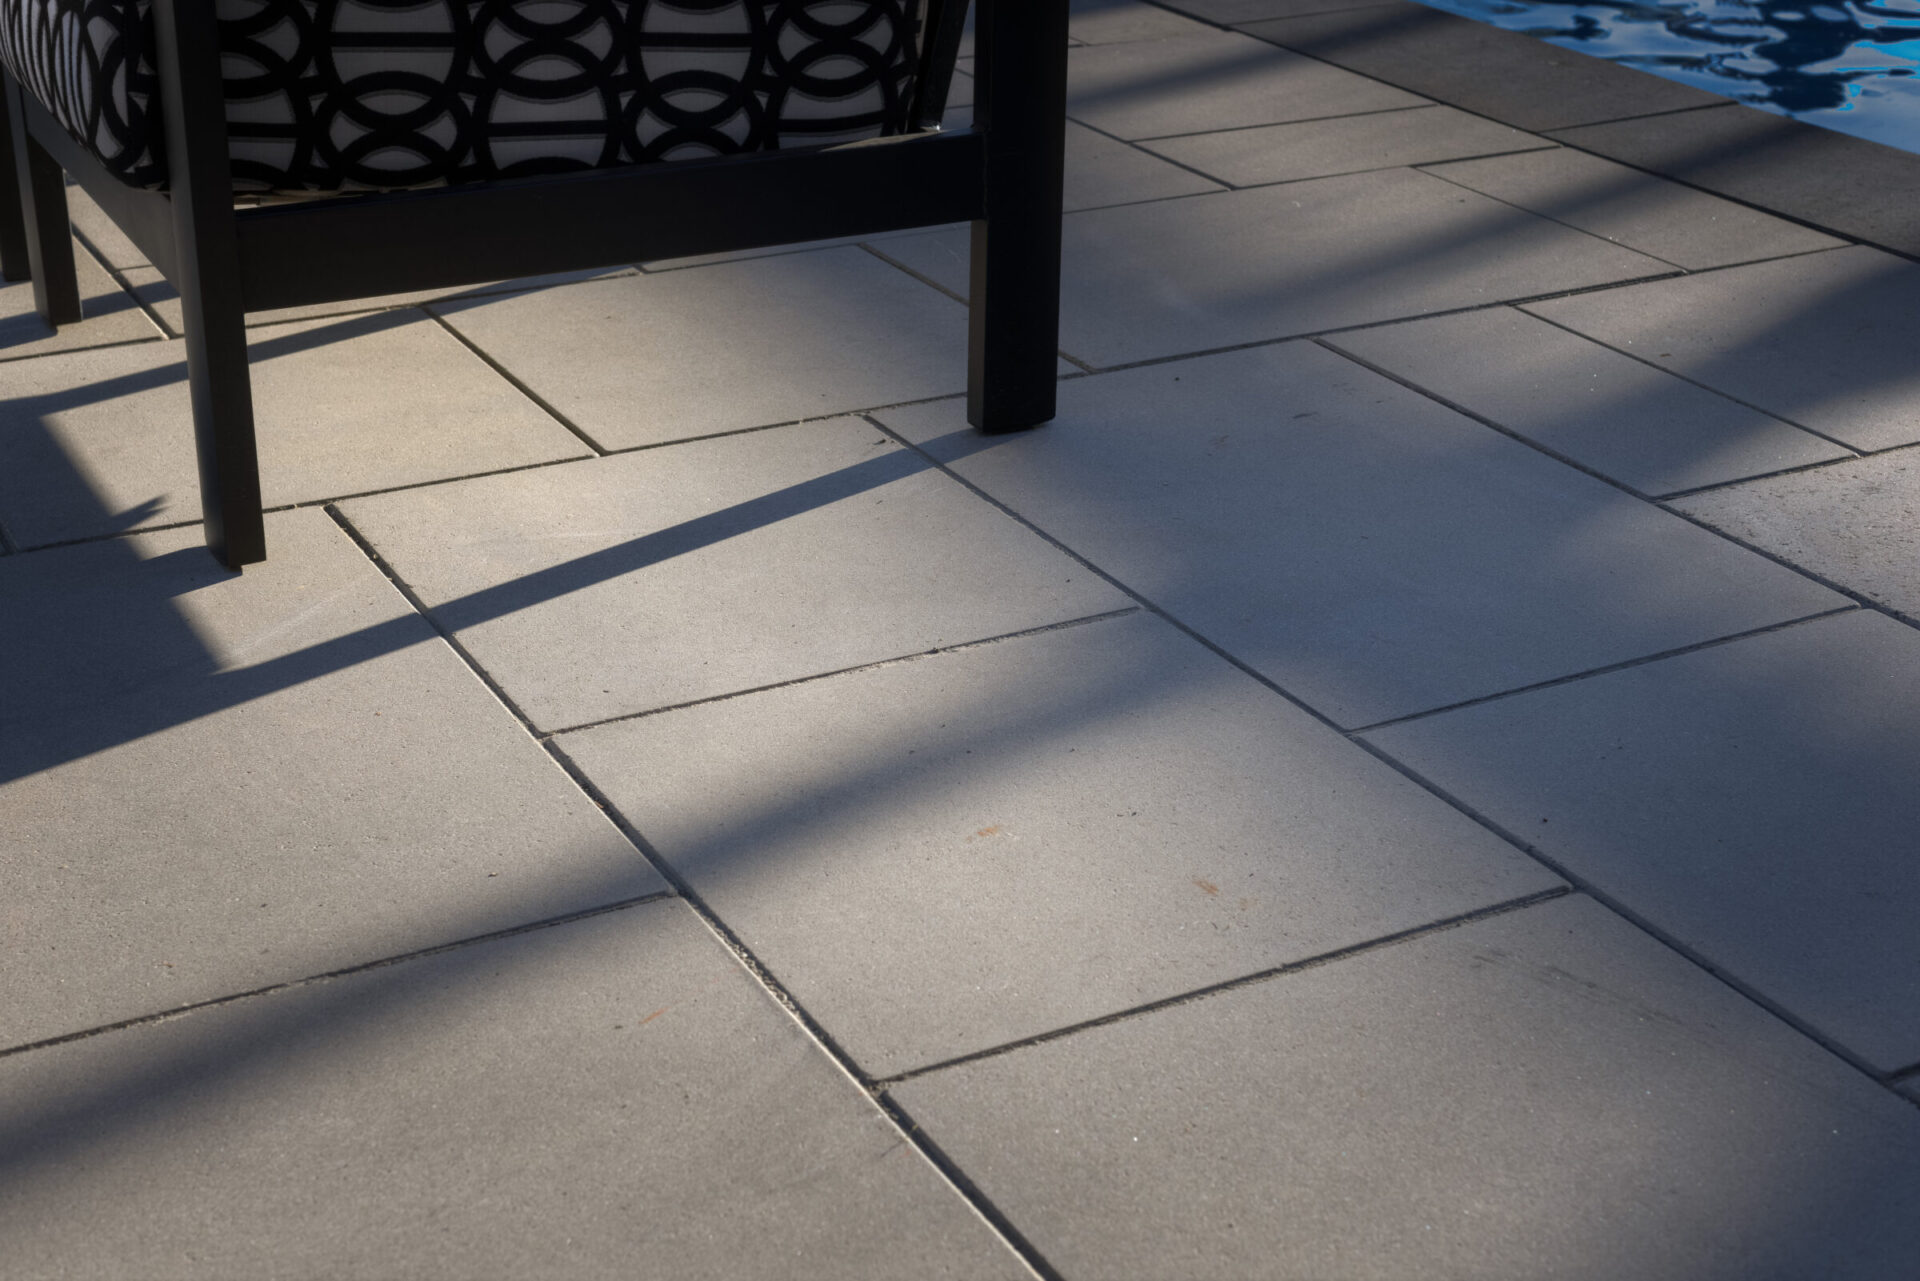 This image shows the floor of a patio with the shadow of a chair and part of a pool visible. The sunlight casts contrasting shadows on the tiles.